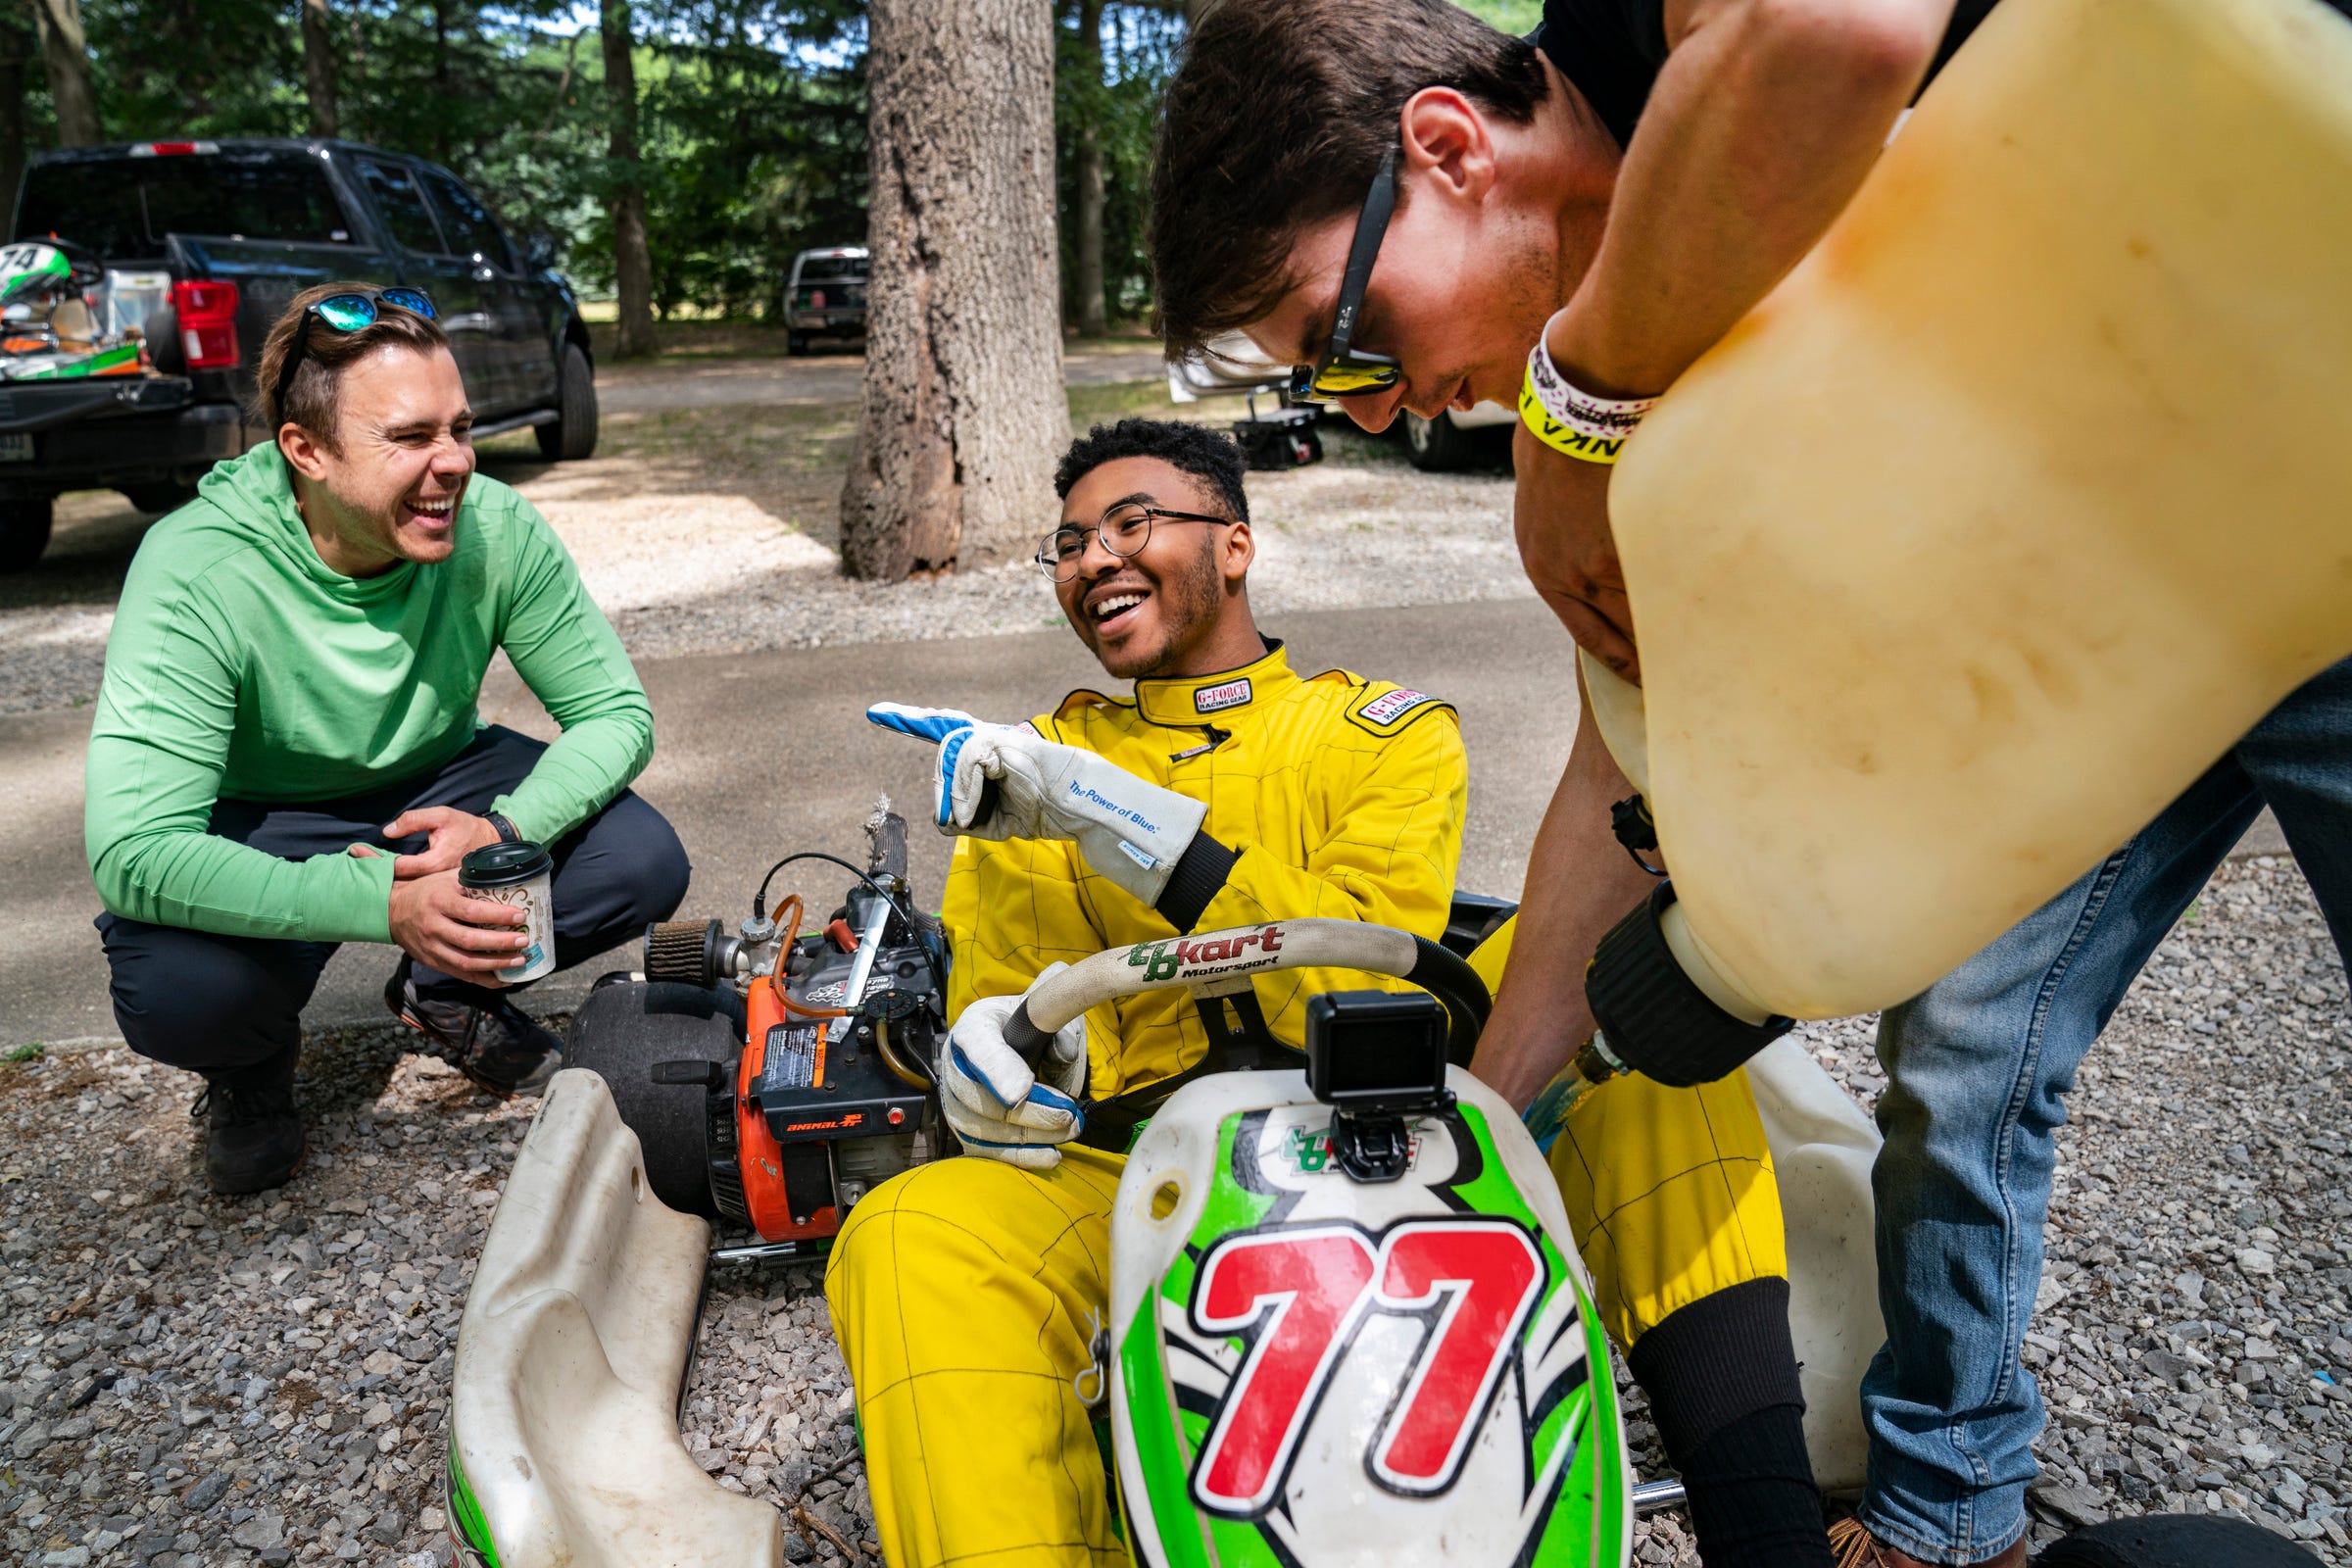 Andy Didorosi, left, of Detroit, and founder of the Detroit Student Race Team, talks strategy with student Noah Christian, 17, of Detroit, center, as team mentor Shane O'Connor gasses up the team go-kart before practice runs at the East Lansing Kart Track on Saturday July, 2, 2022.